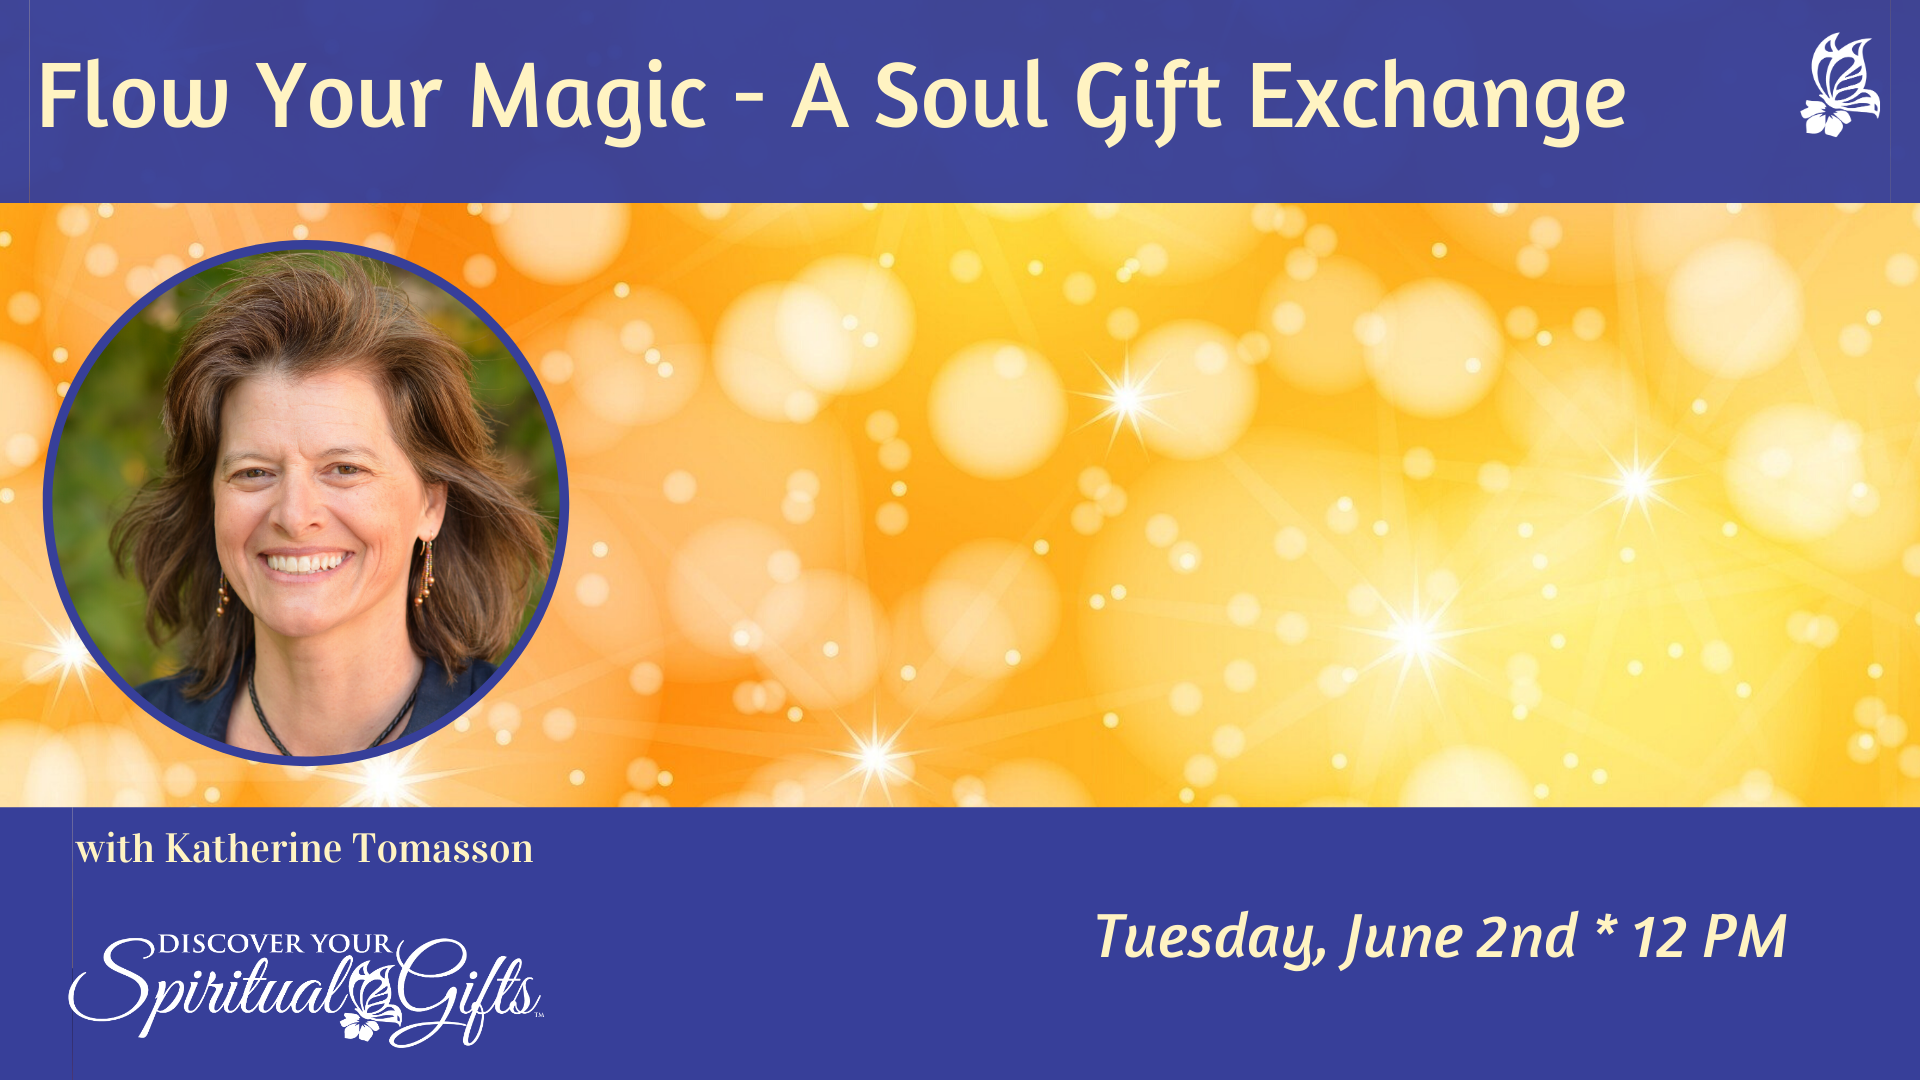 Flow Your Magic - A Soul Gift Exchange